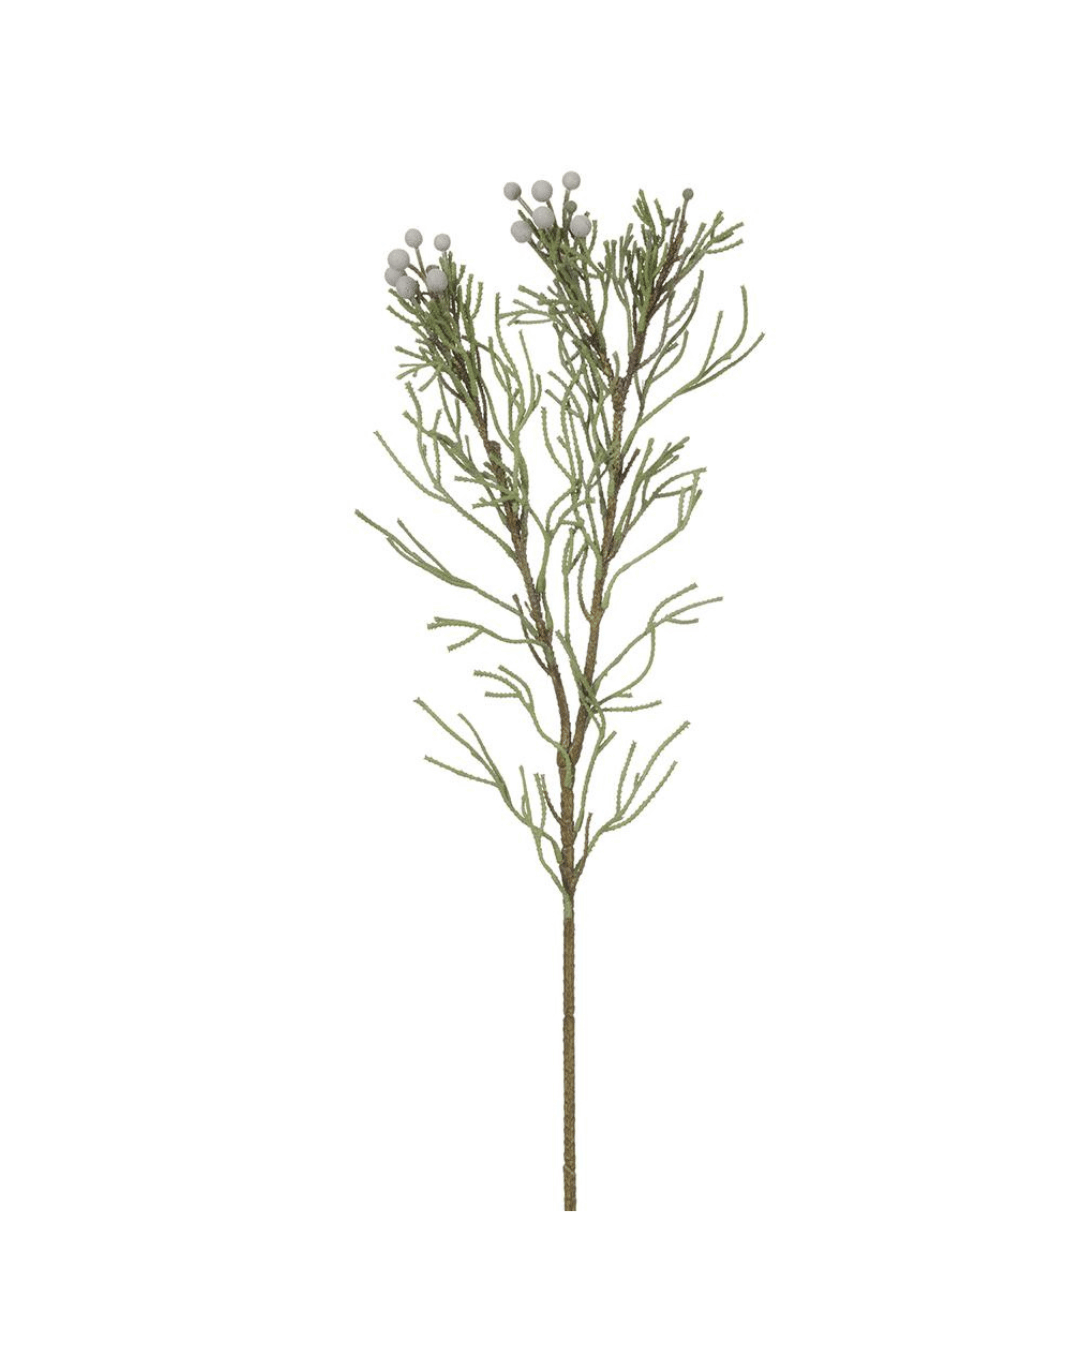 Illustration of a single 33" Brunia Spray branch with sparse needle-like leaves and small grey berries at the tips, typical of Scottsdale, Arizona, isolated on a white background.